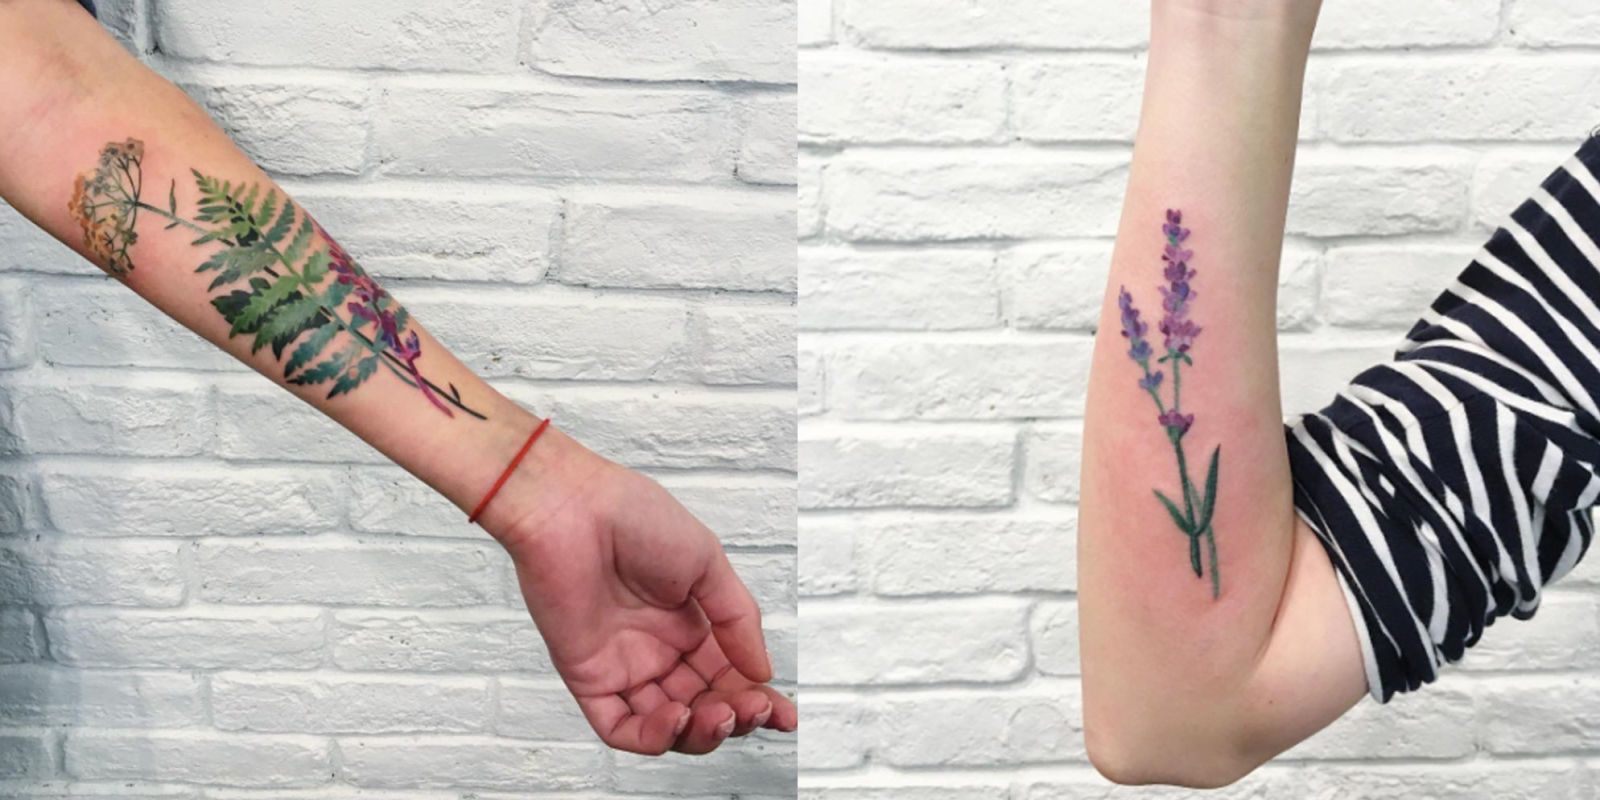 Plant Tattoo Meaning  Tattoo With Organic Touch  TattoosWin